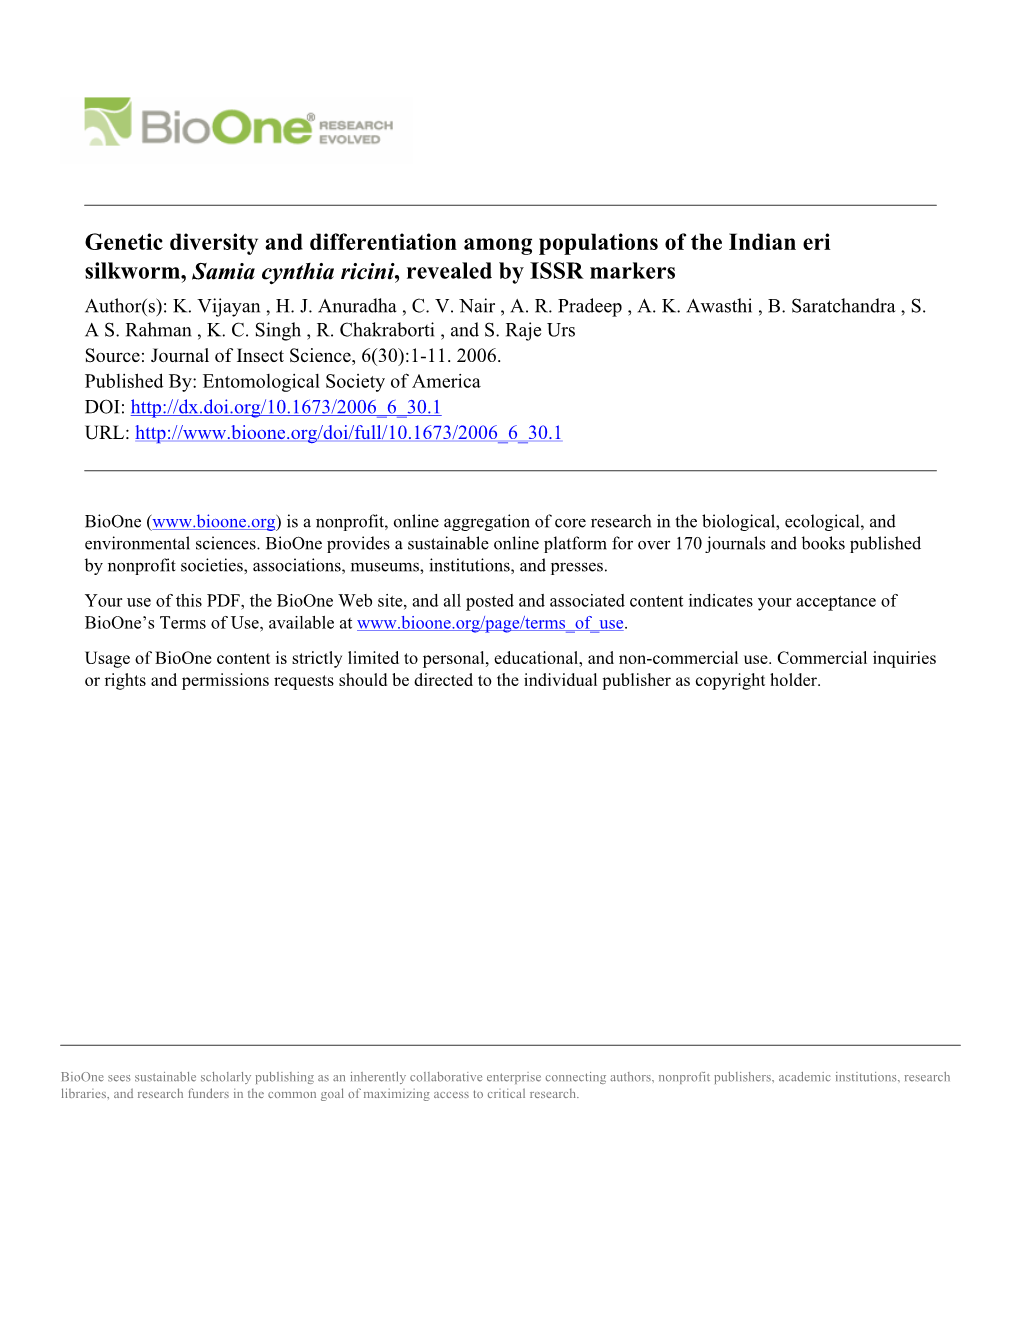 Genetic Diversity and Differentiation Among Populations of the Indian Eri Silkworm, Samia Cynthia Ricini, Revealed by ISSR Markers Author(S): K